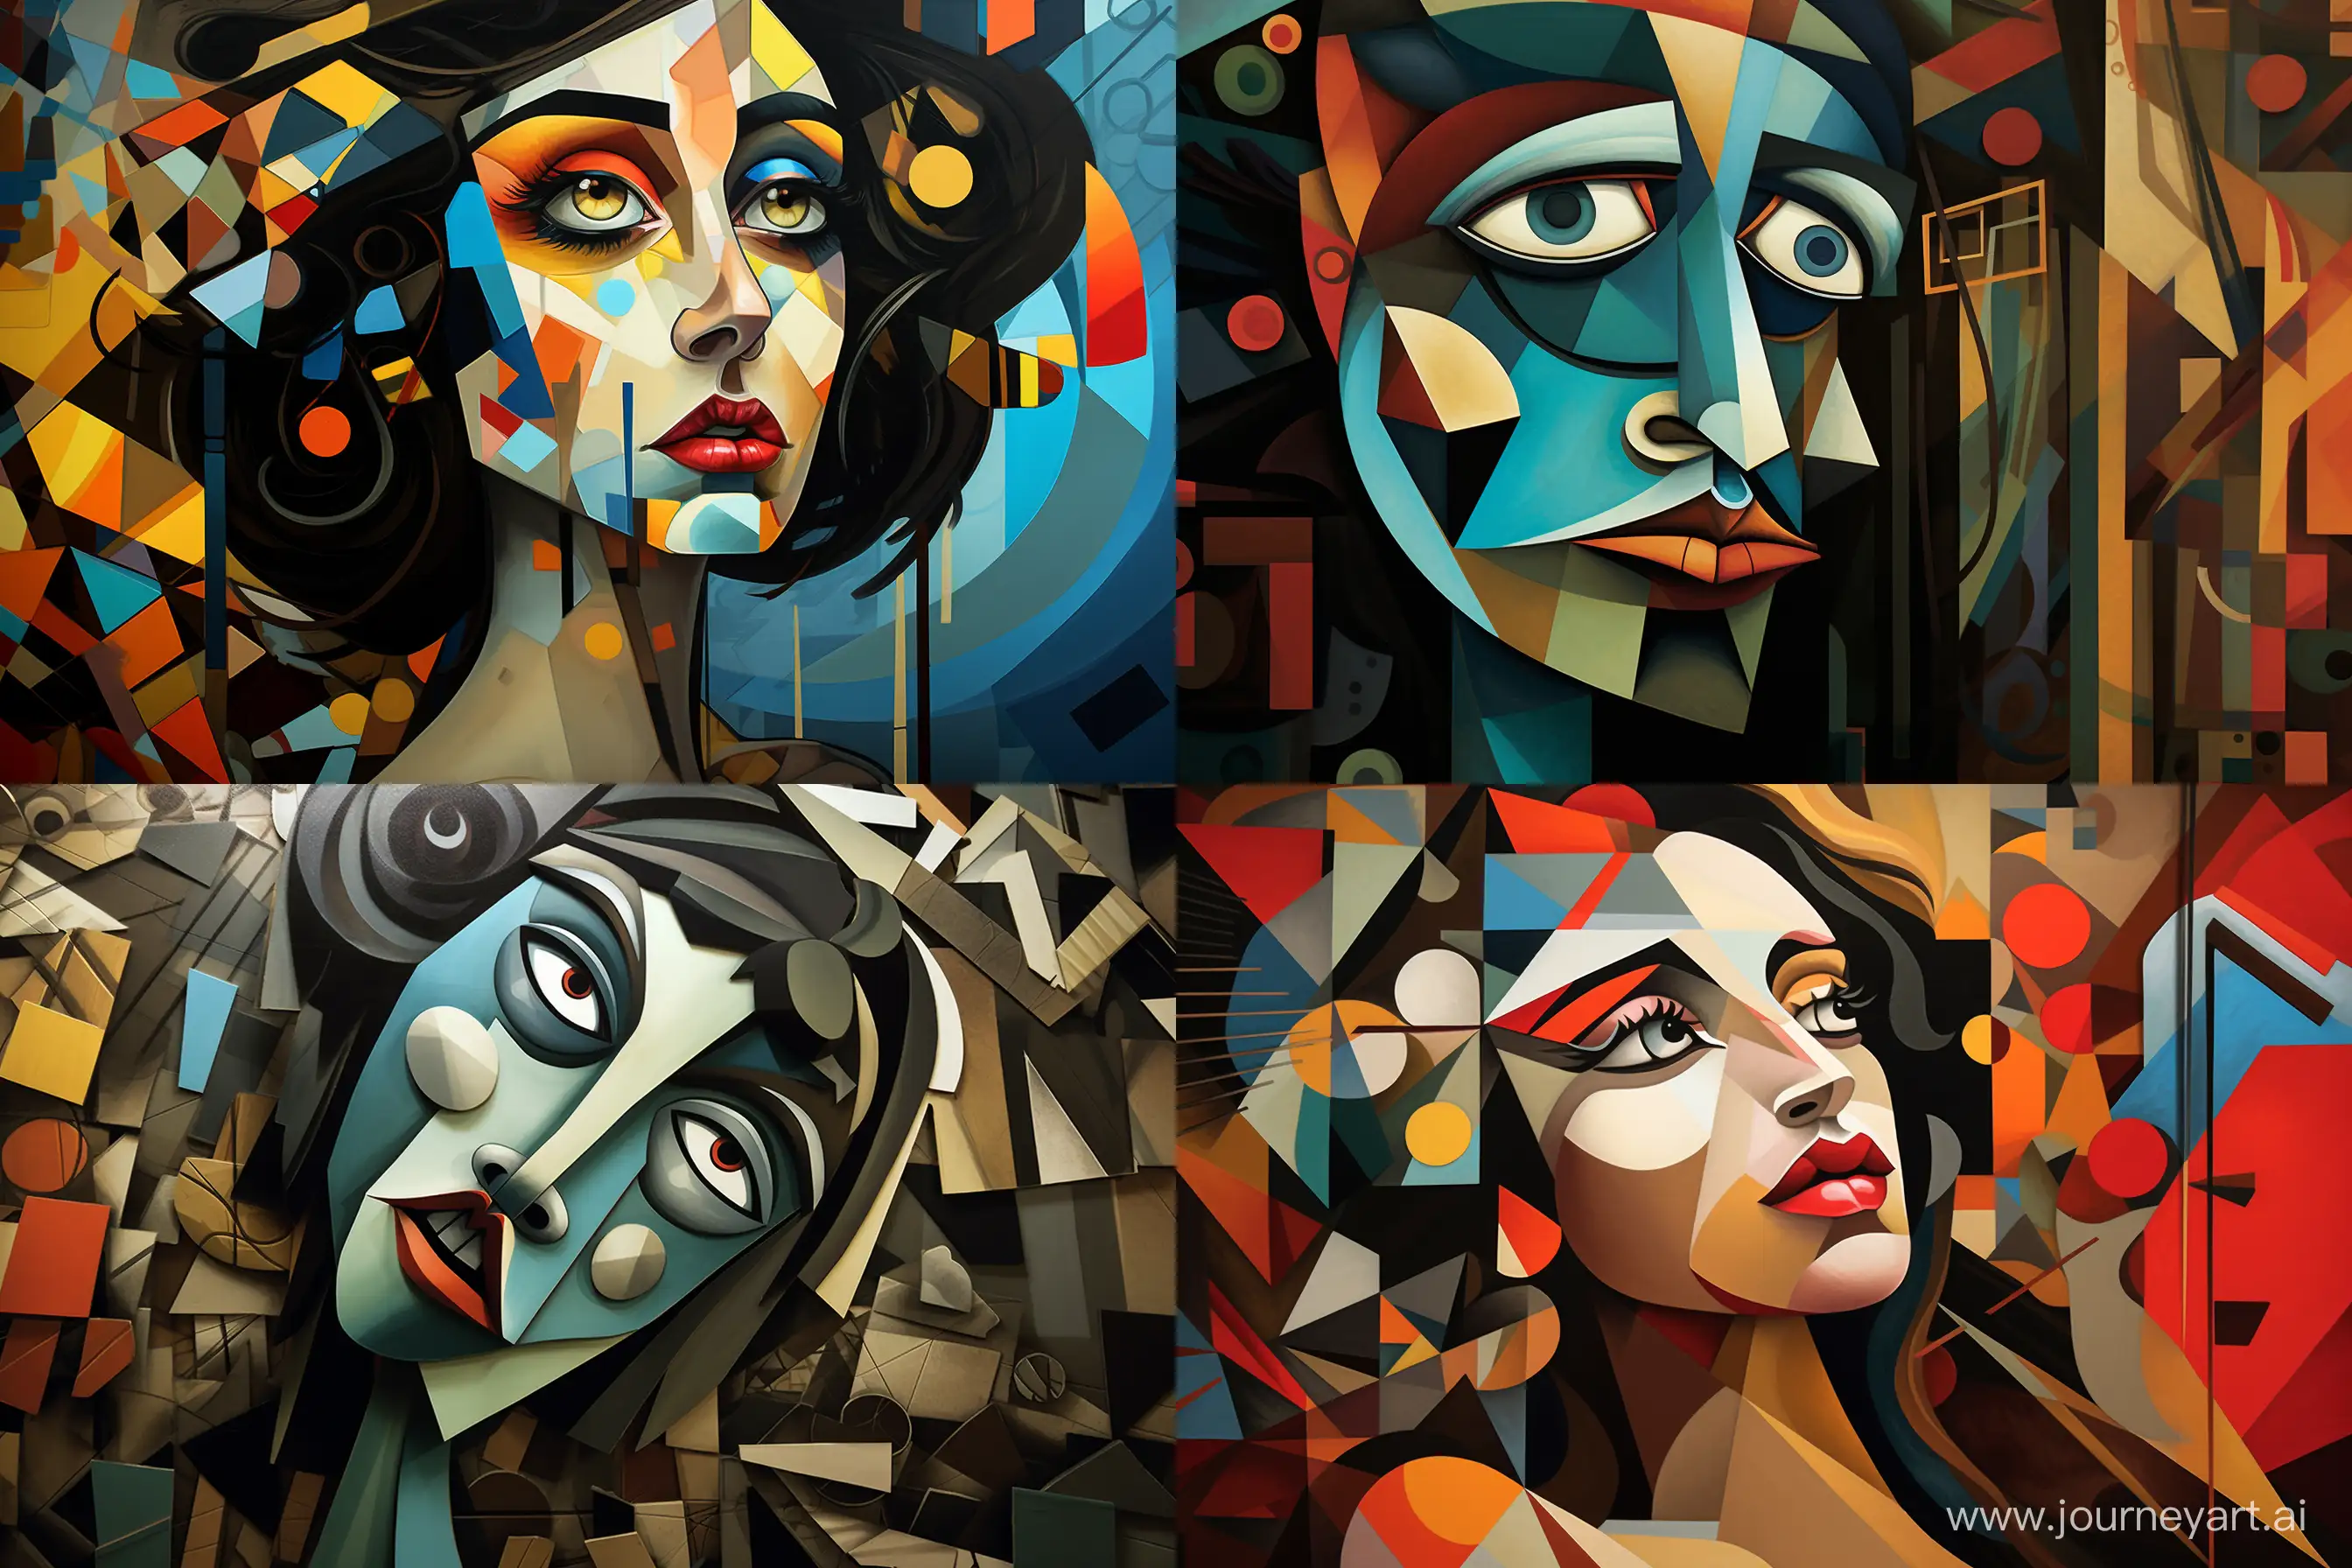 Cubist Explorer
A character depicted in the fragmented style of cubism, exploring a surreal environment. --ar 3:2